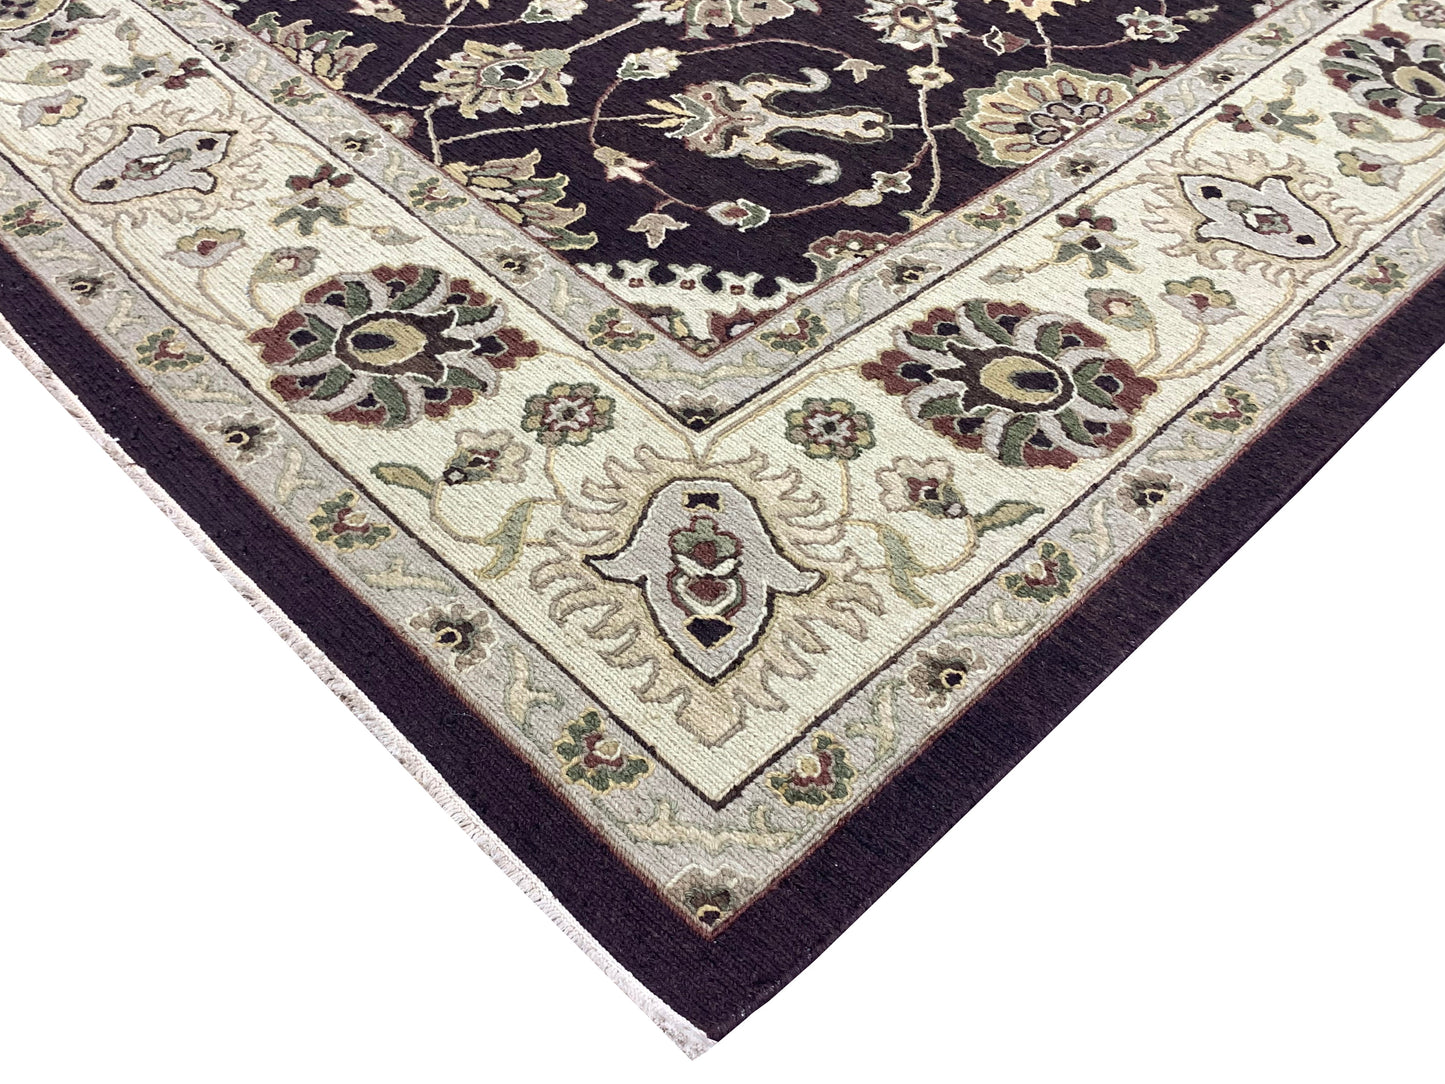 Get trendy with Brown Pure Wool Traditional Soumak Area Rug 8.1x9.11ft 246x301Cms - Traditional Rugs available at Jaipur Oriental Rugs. Grab yours for $225.00 today!